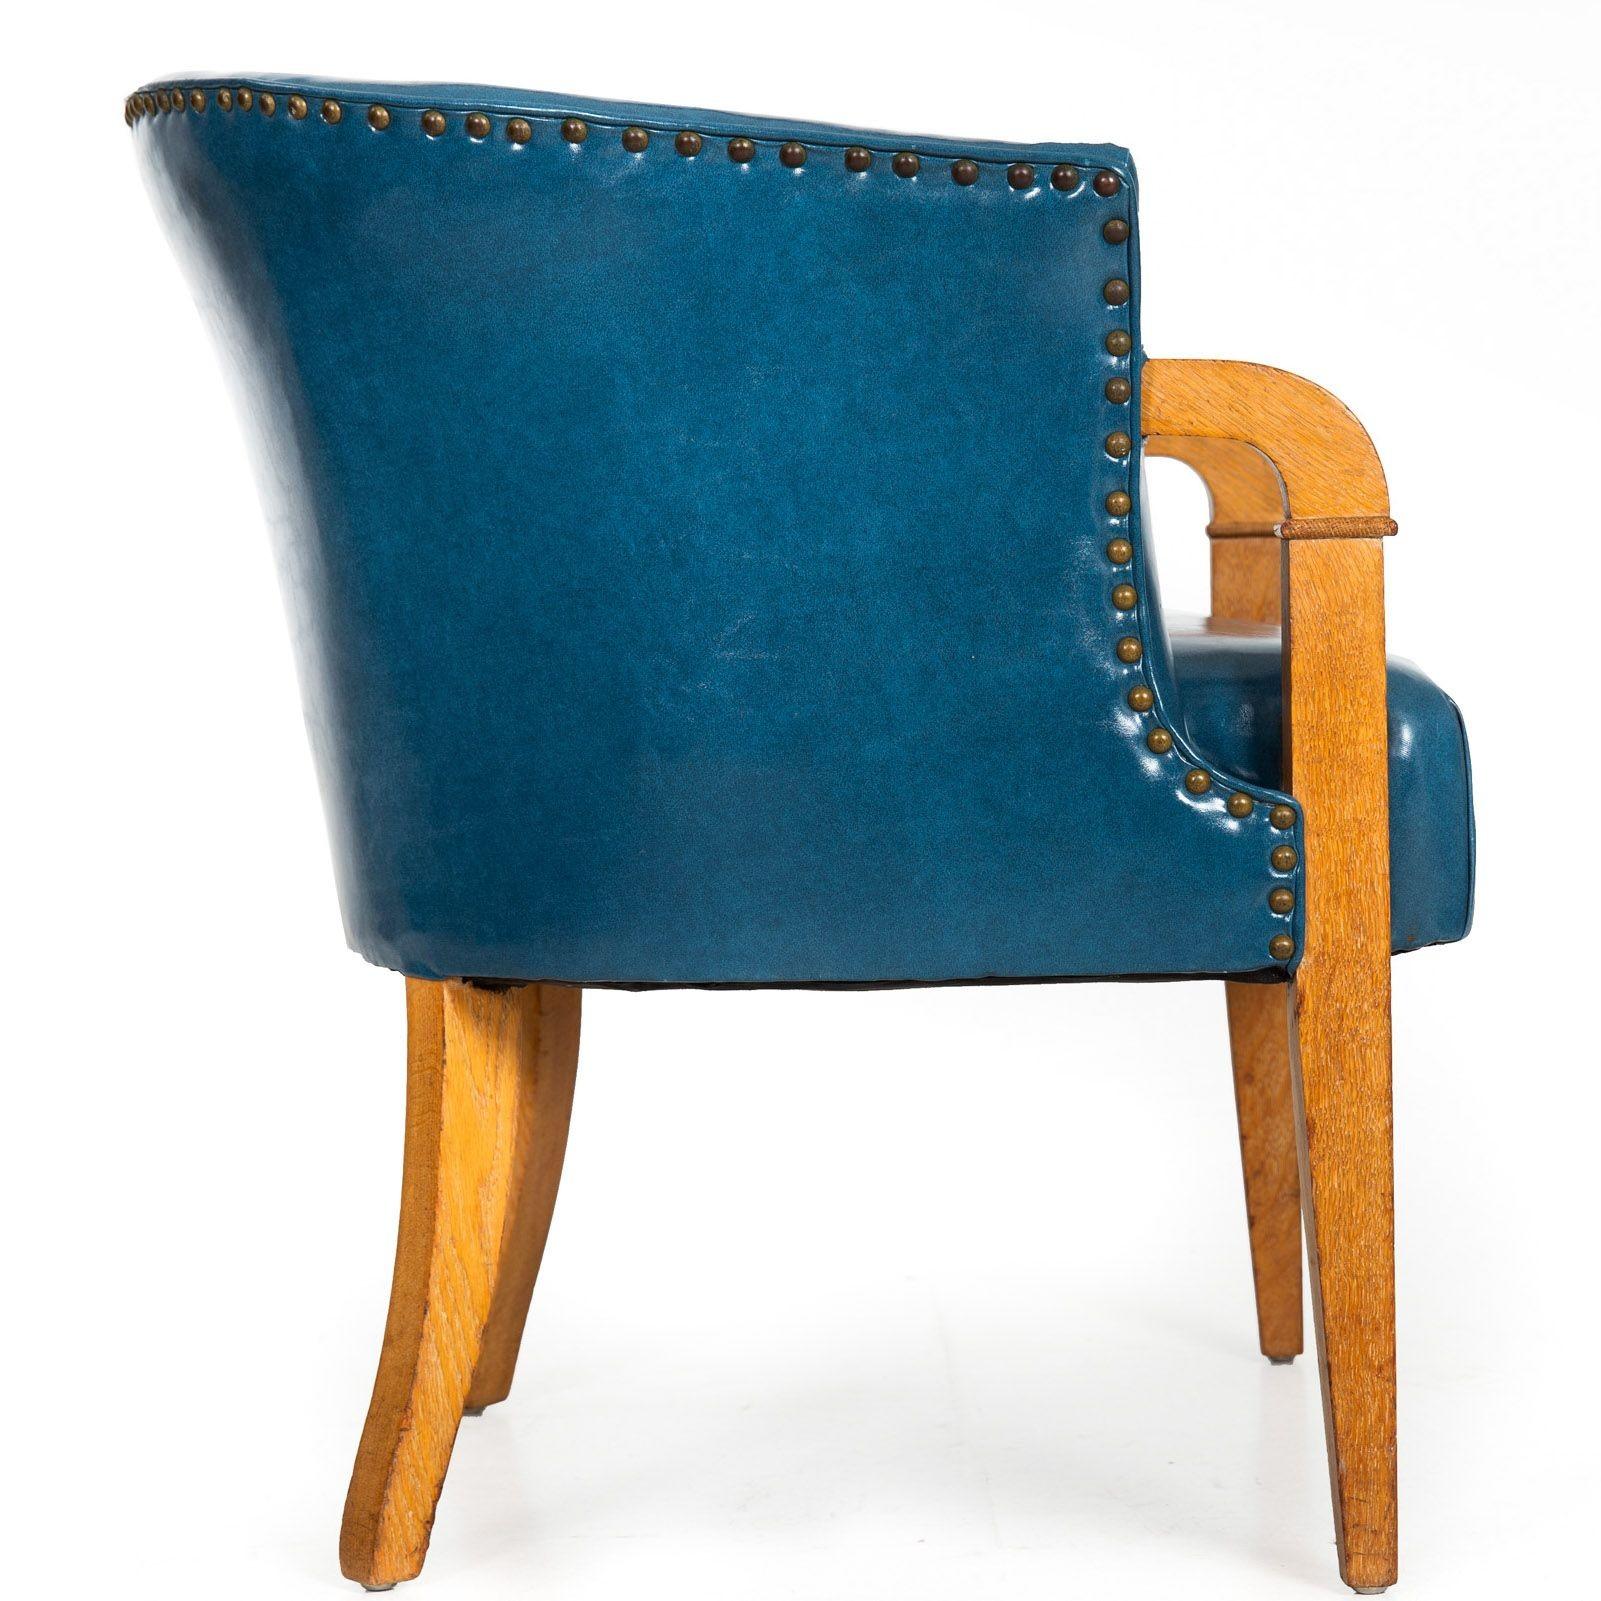 Mid-Century Modernist White Oak Tub Arm Chair in Blue Faux-Leather In Good Condition For Sale In Shippensburg, PA